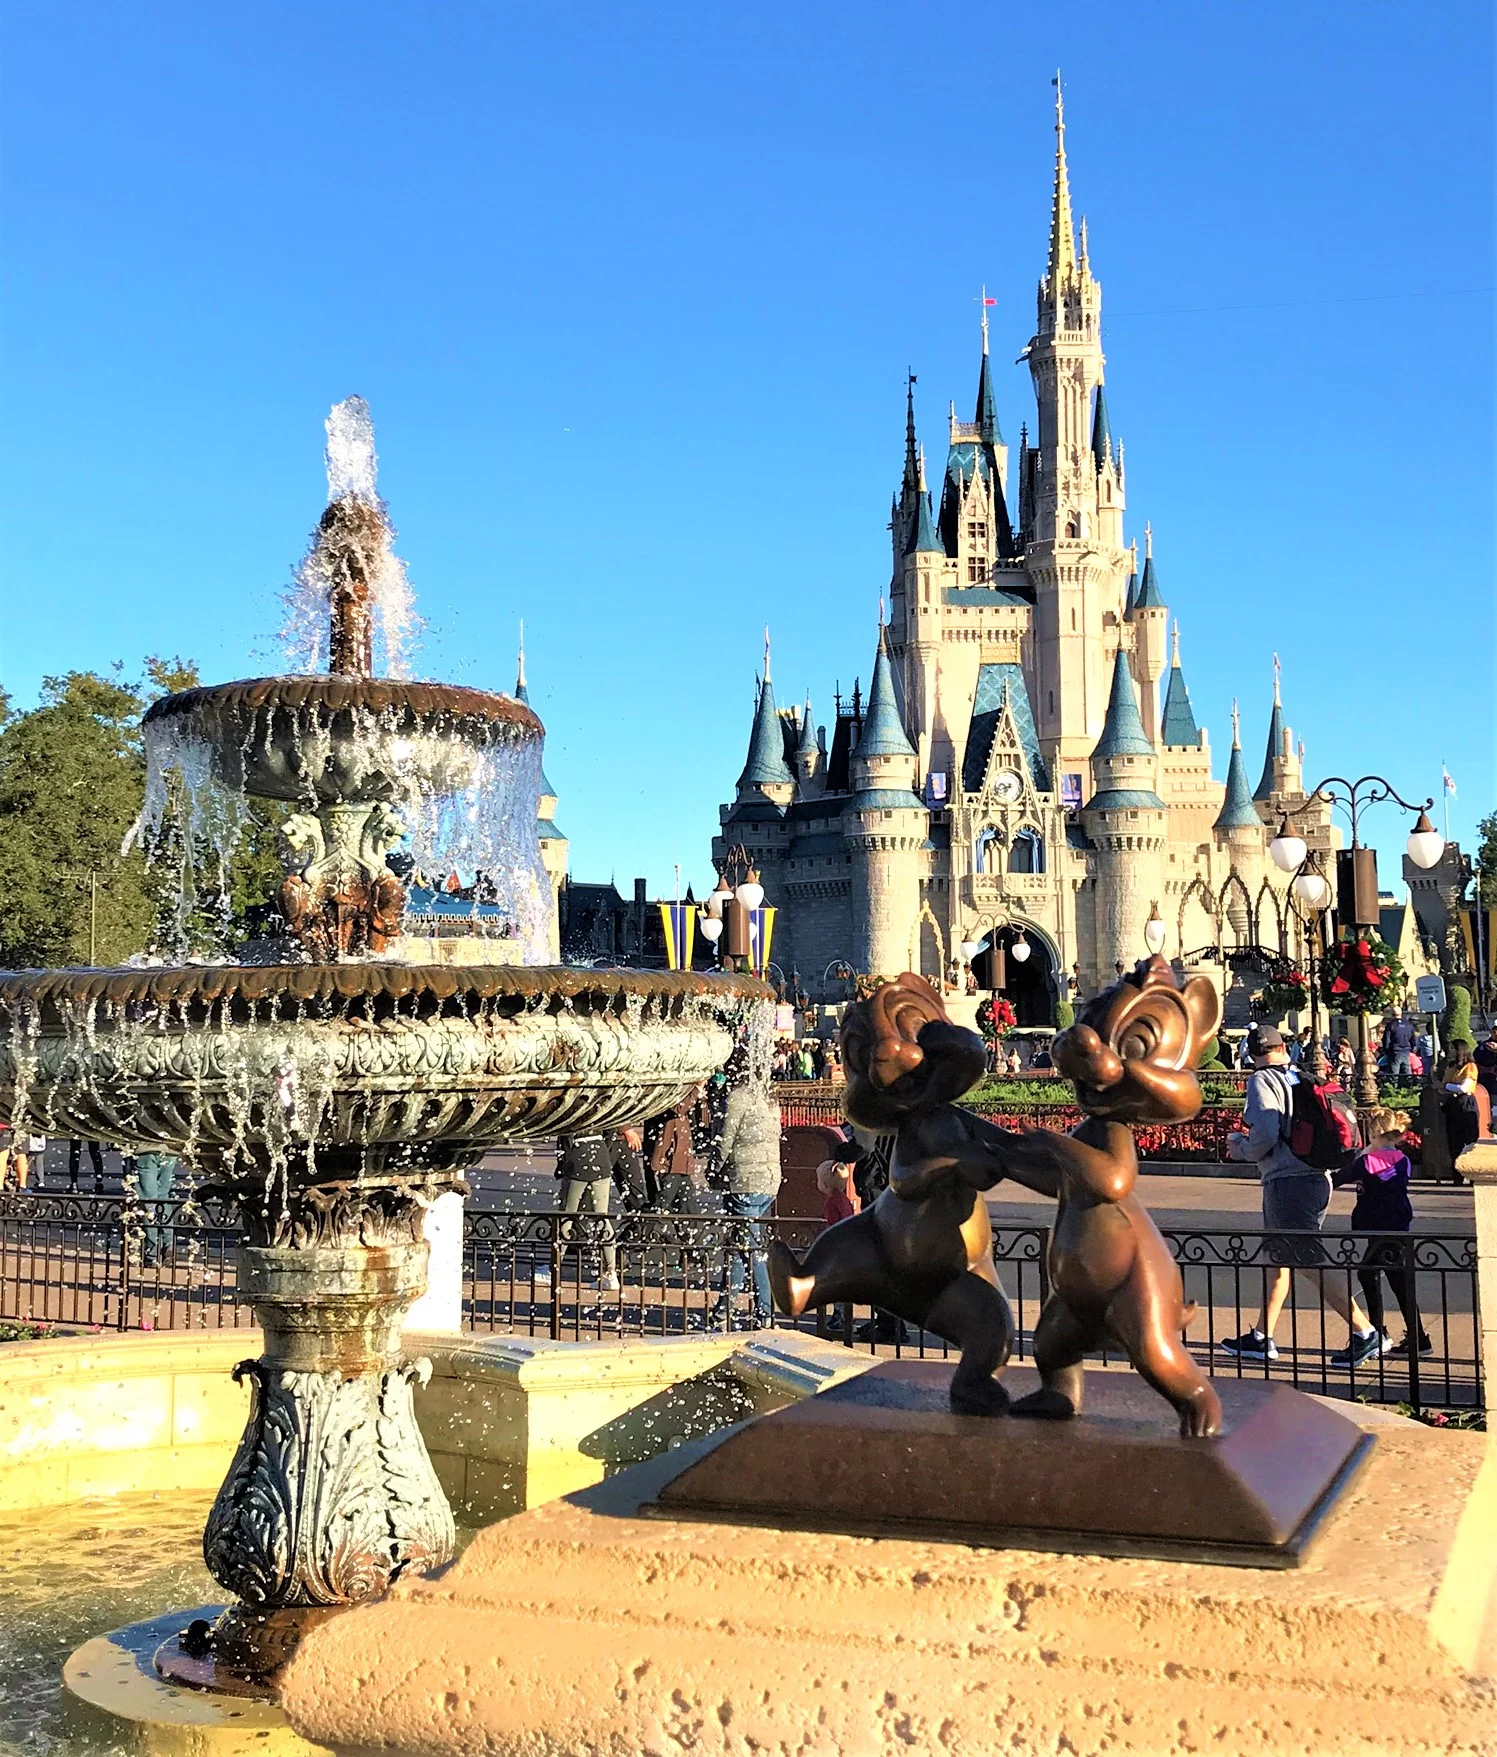 Cinderella castle with fountain in front